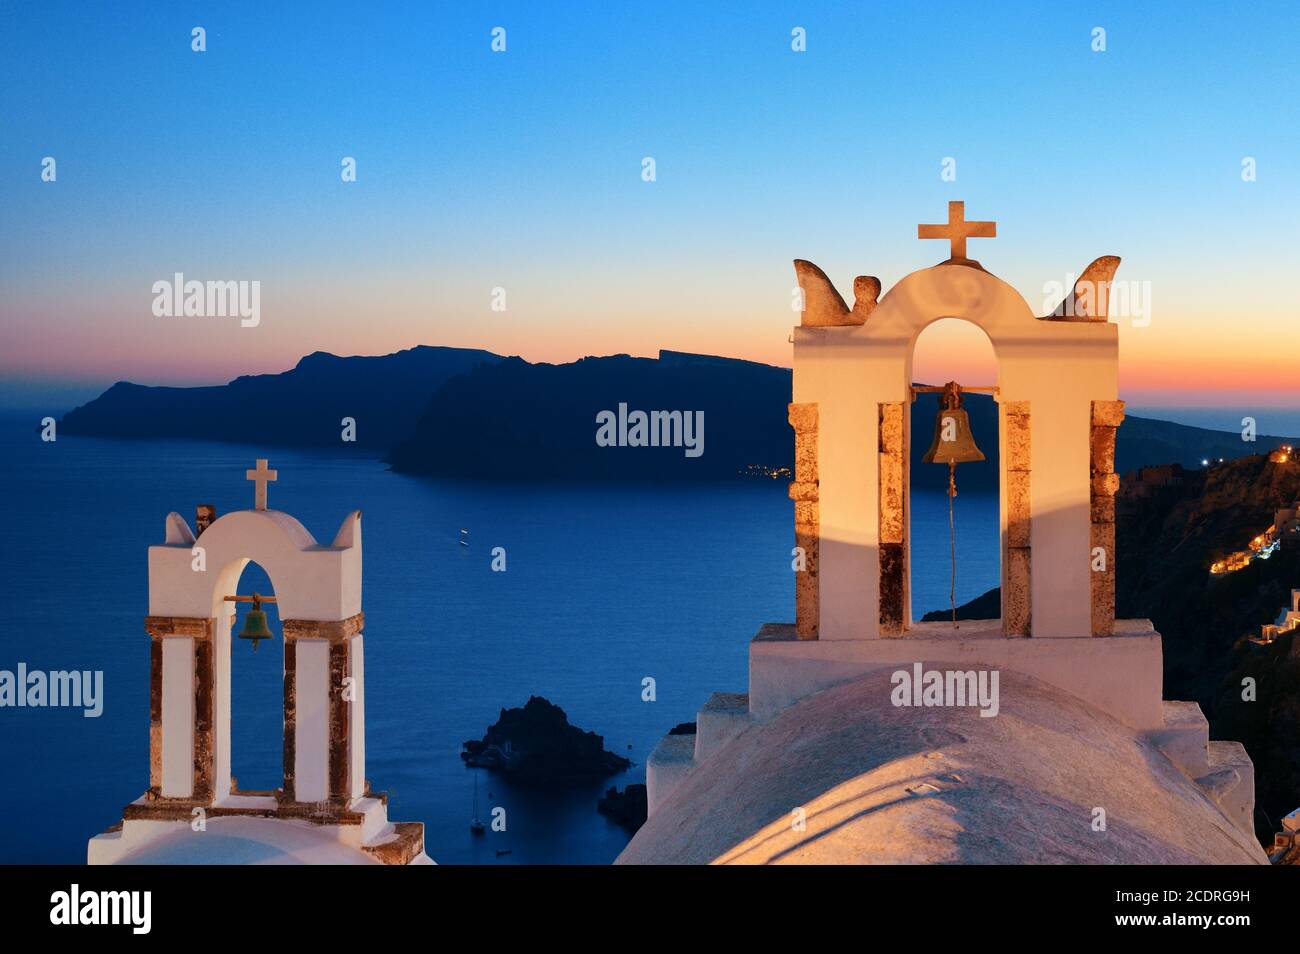 Santorini skyline at night with buildings and bell tower in Greece. Stock Photo